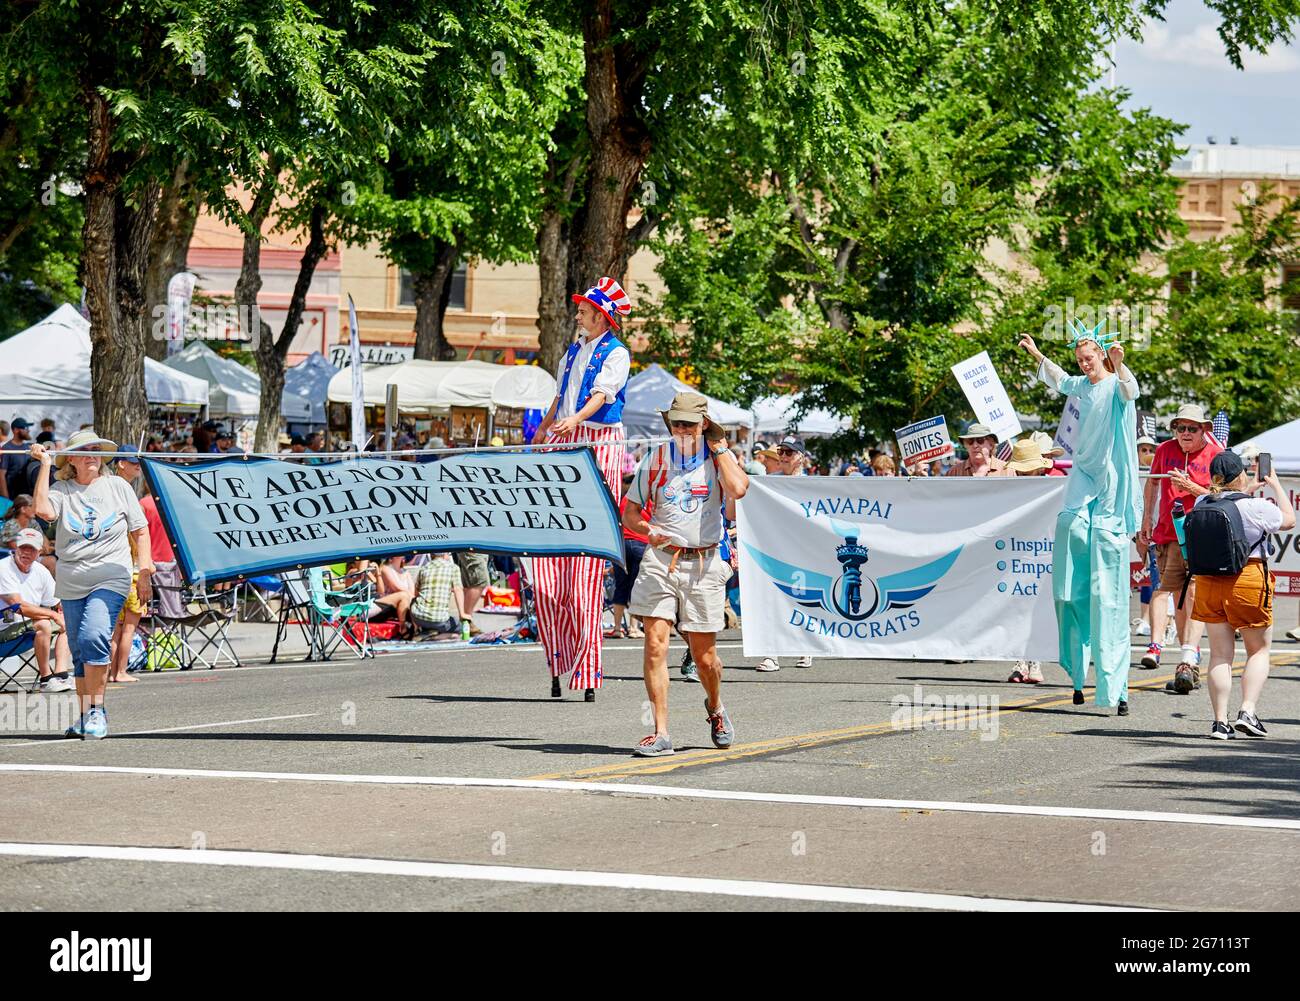 Prescott, Arizona, USA - July 3, 2021: Yavapai Democrats carrying a banner and dressed in costume while marching in the 4th of July parade Stock Photo